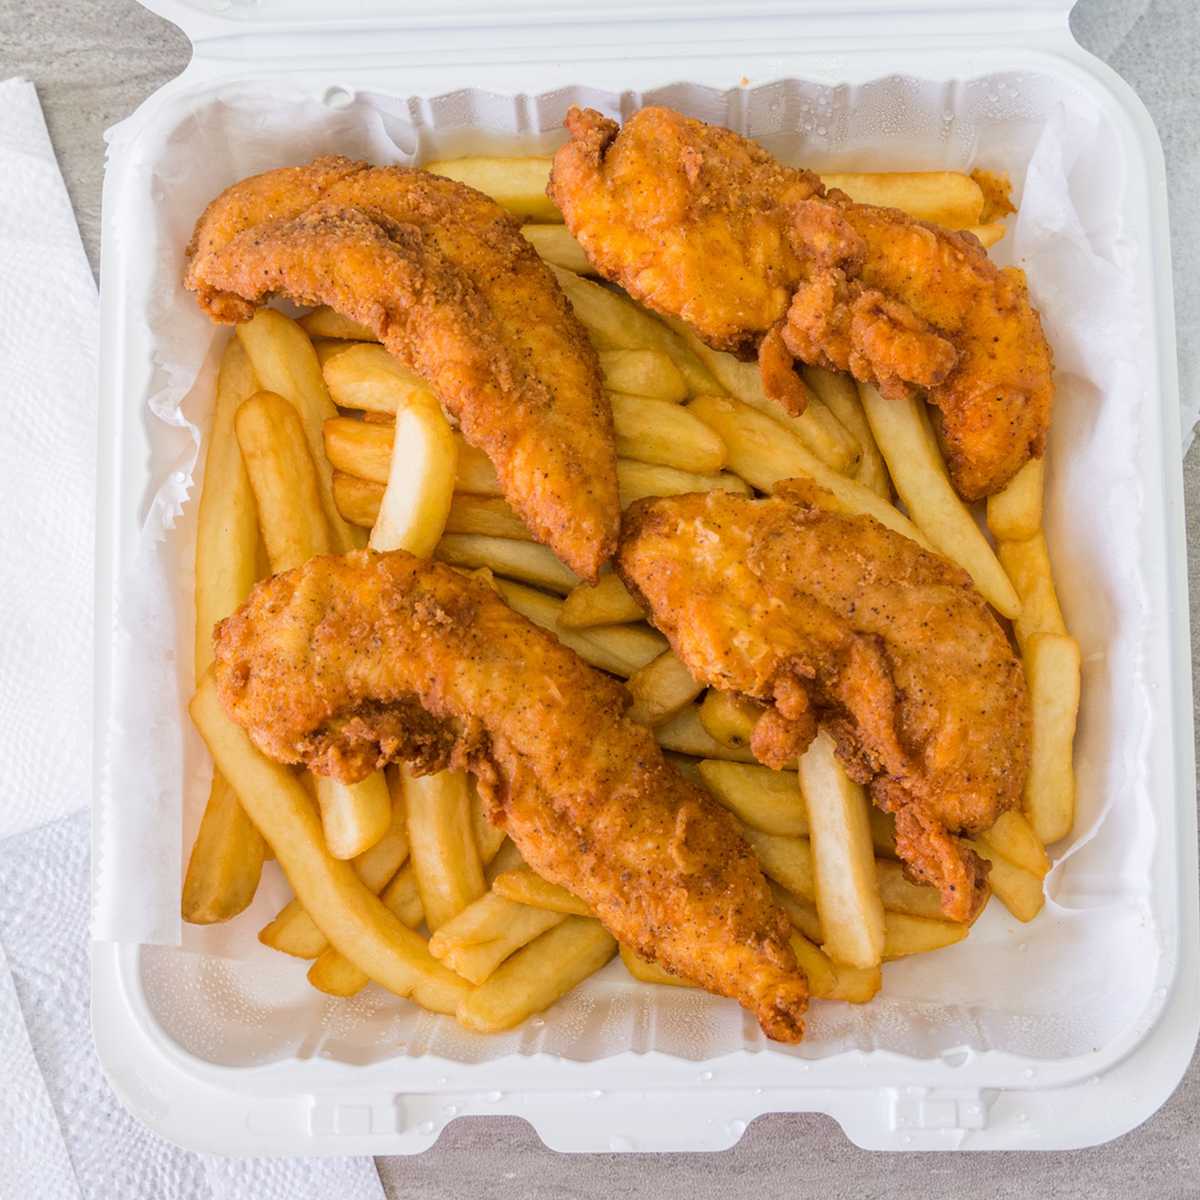 new york fried chicken near me baltimore national pike